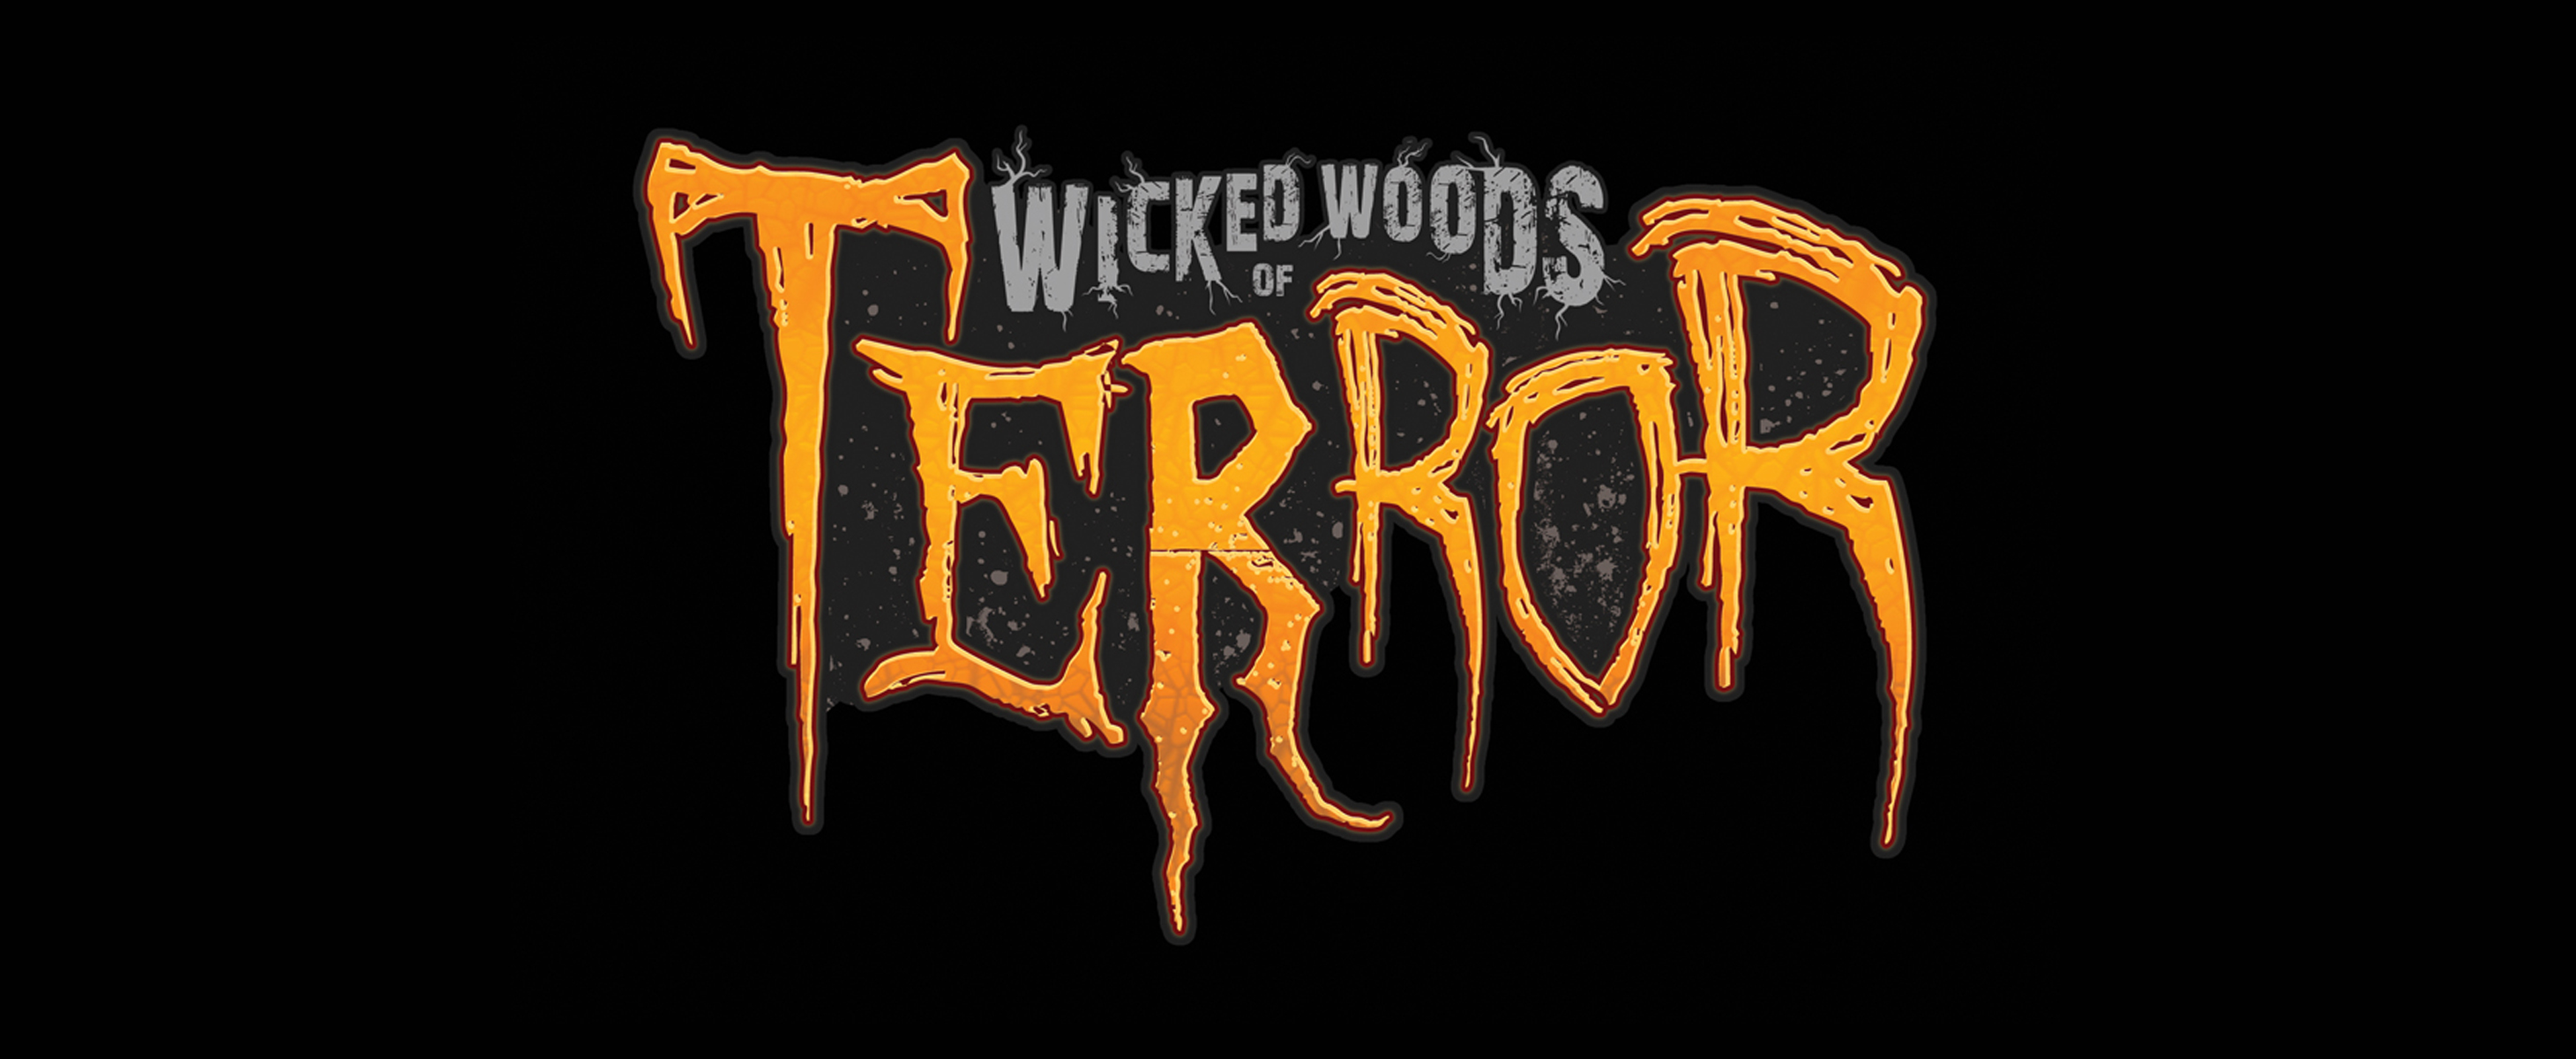 [NEW LISTING] Wicked Woods of Terror